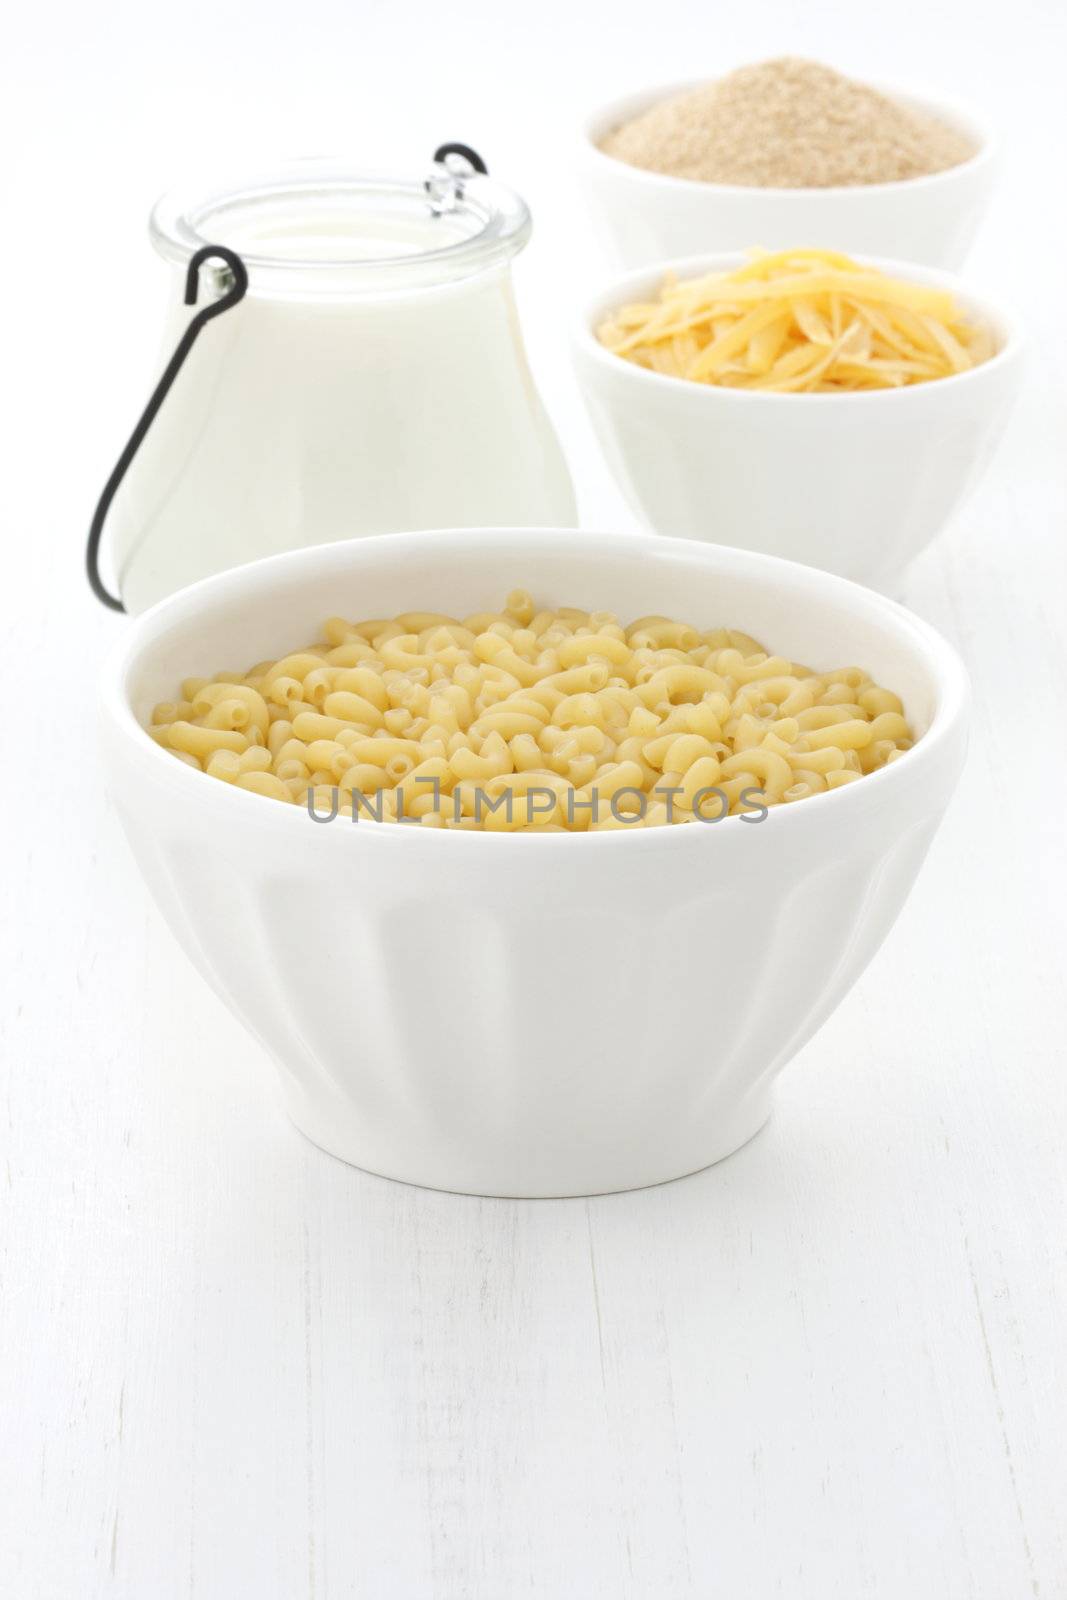 Delicious macaroni and cheese ingredients with a smooth milk cream, fine bread crumbs and aged cheddar cheese. Almost every kid and adult will love it at once. 